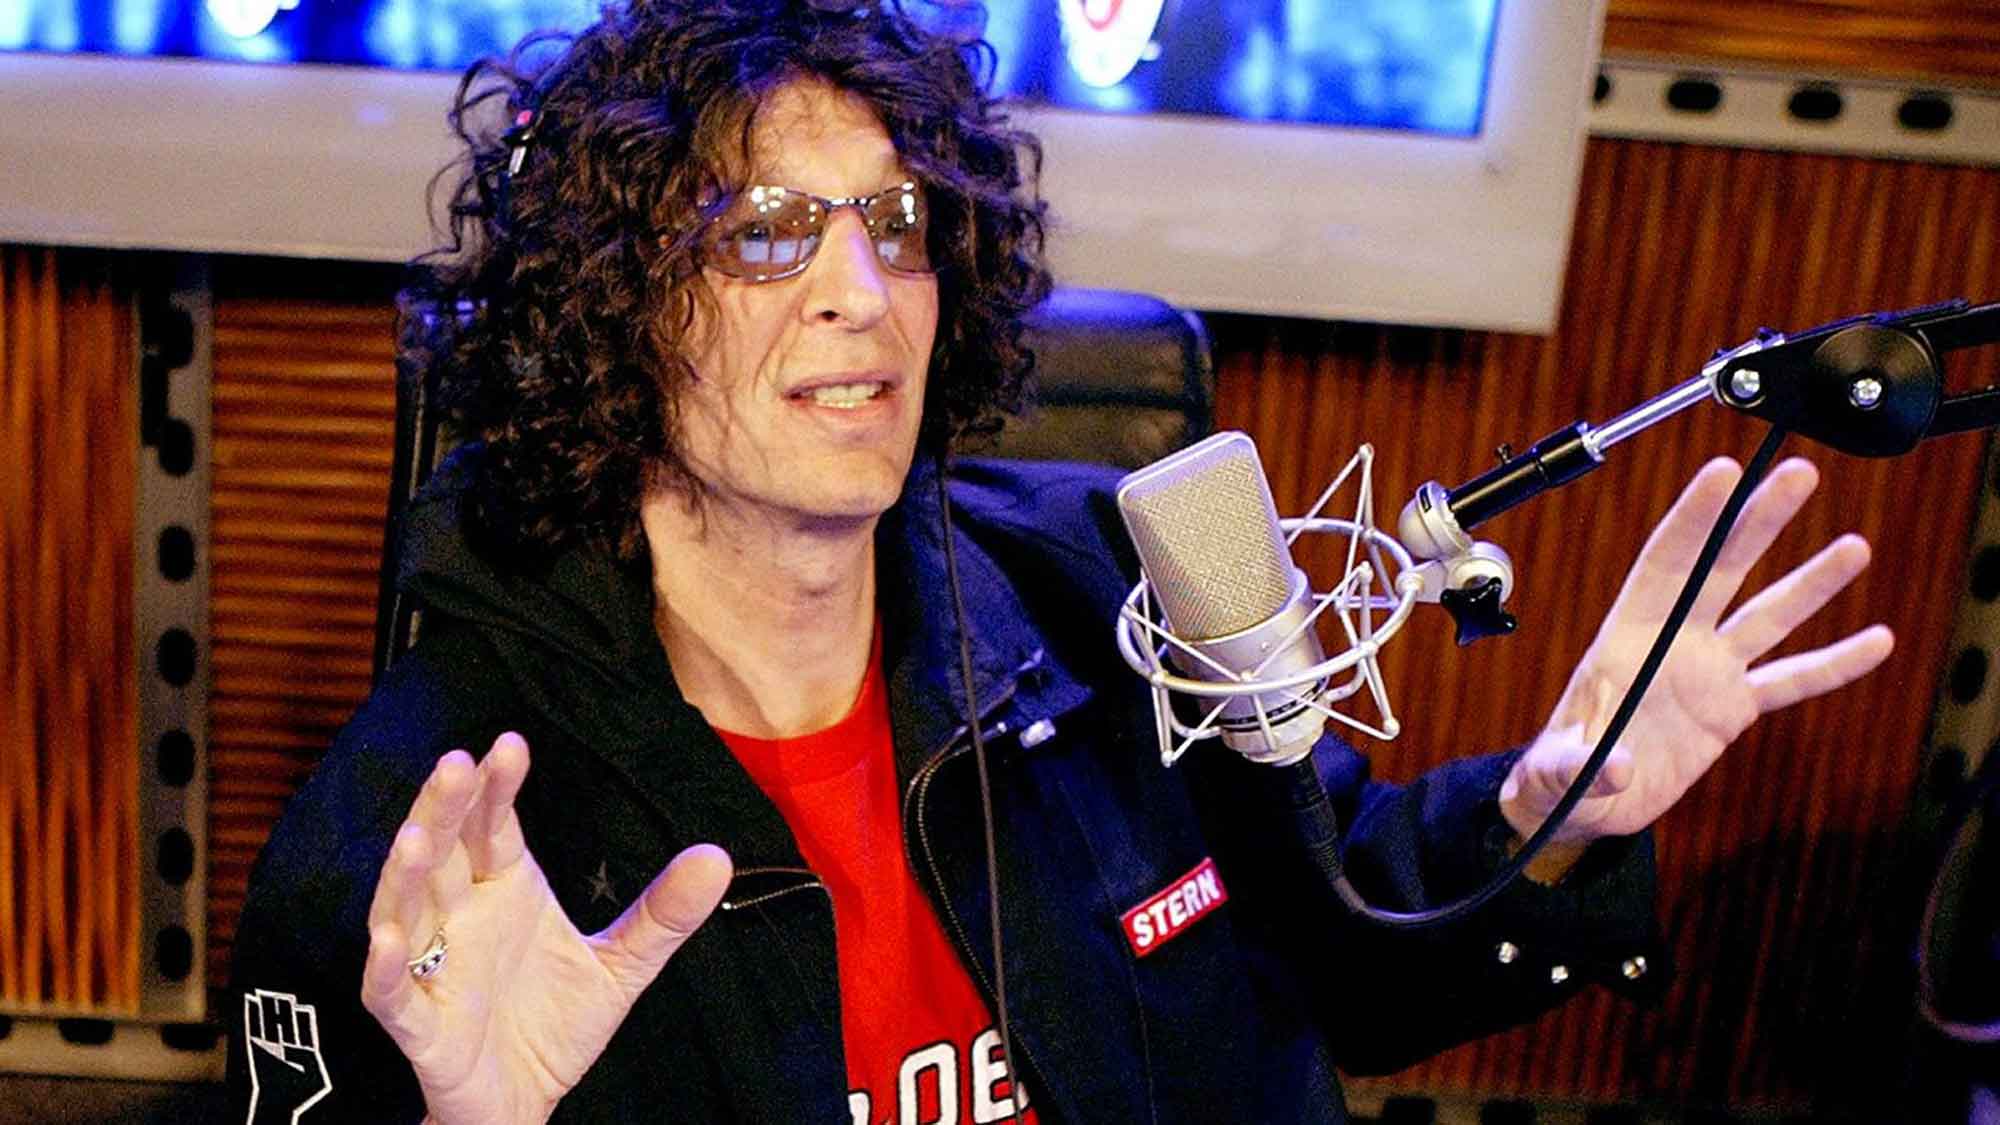 Howard Stern Fans Get A Rude Awaking With David Lee Roth